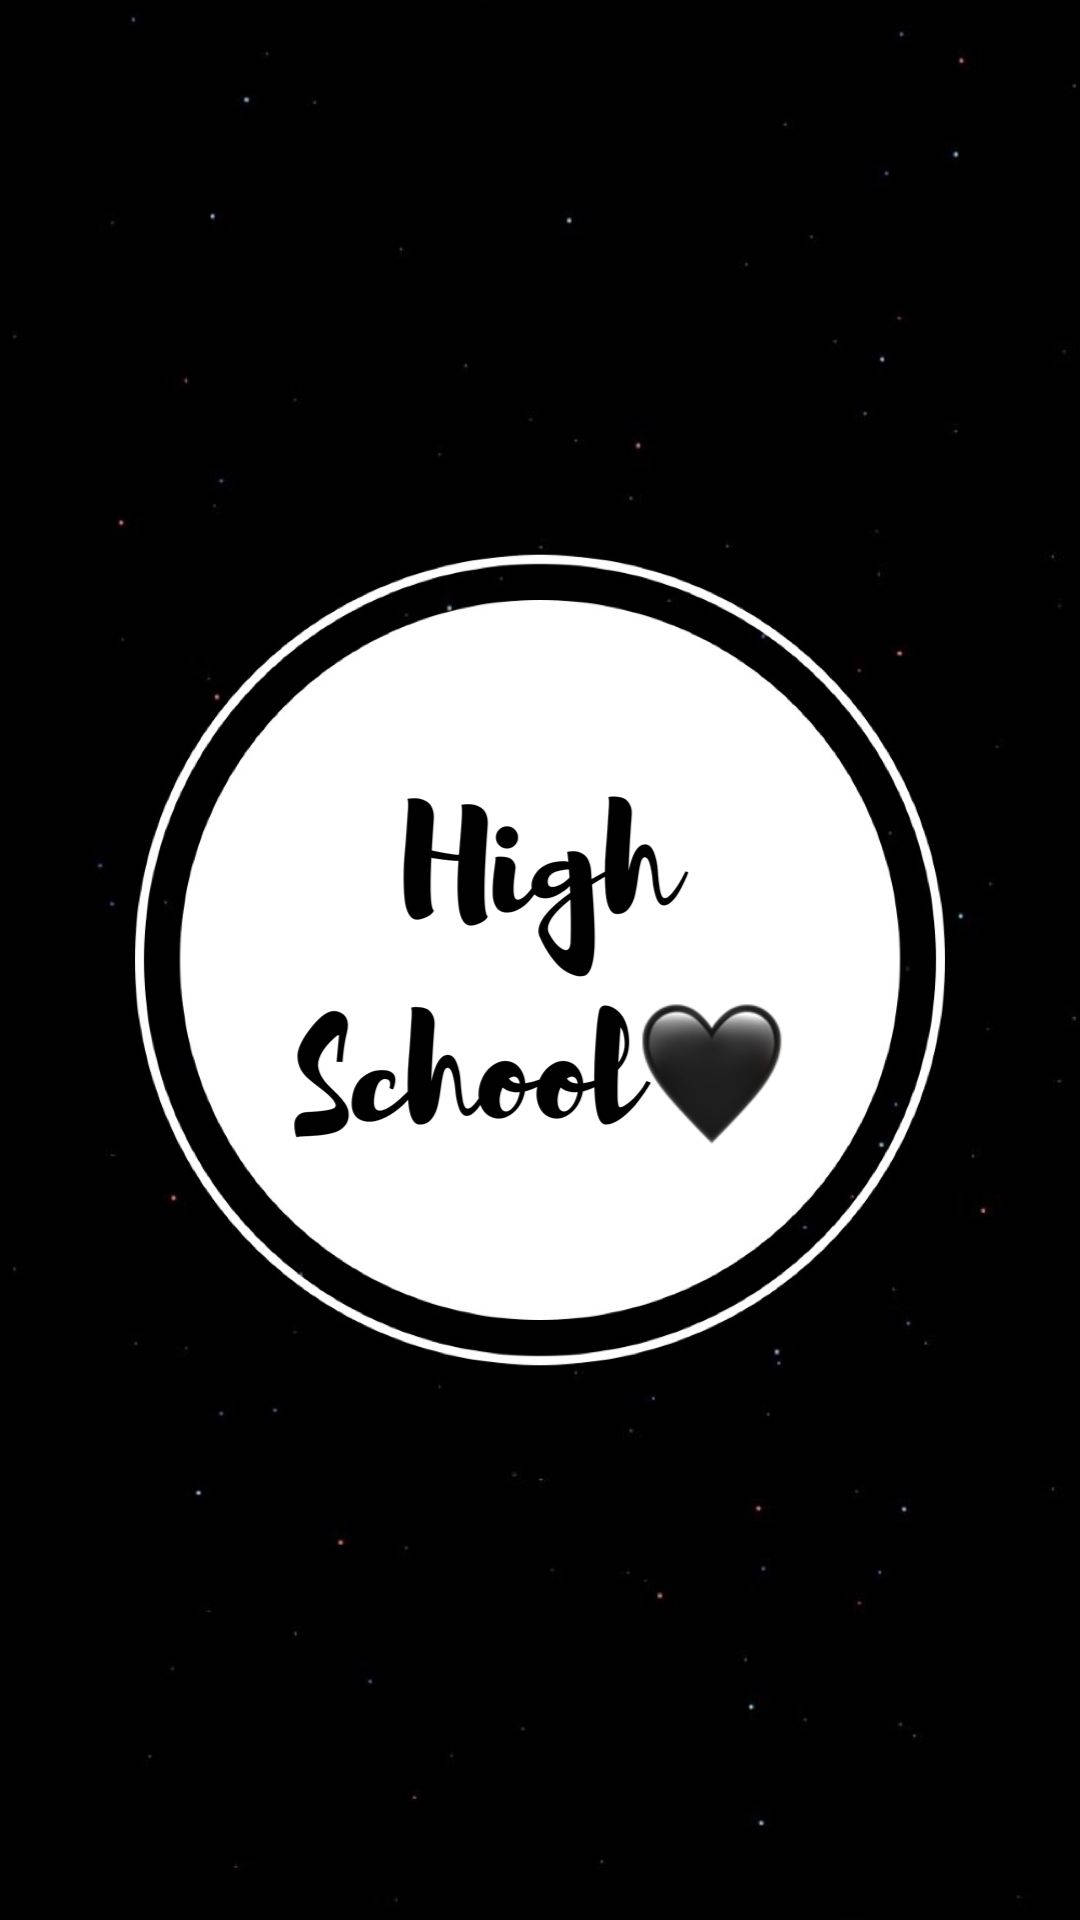 High School With A Black Heart Background